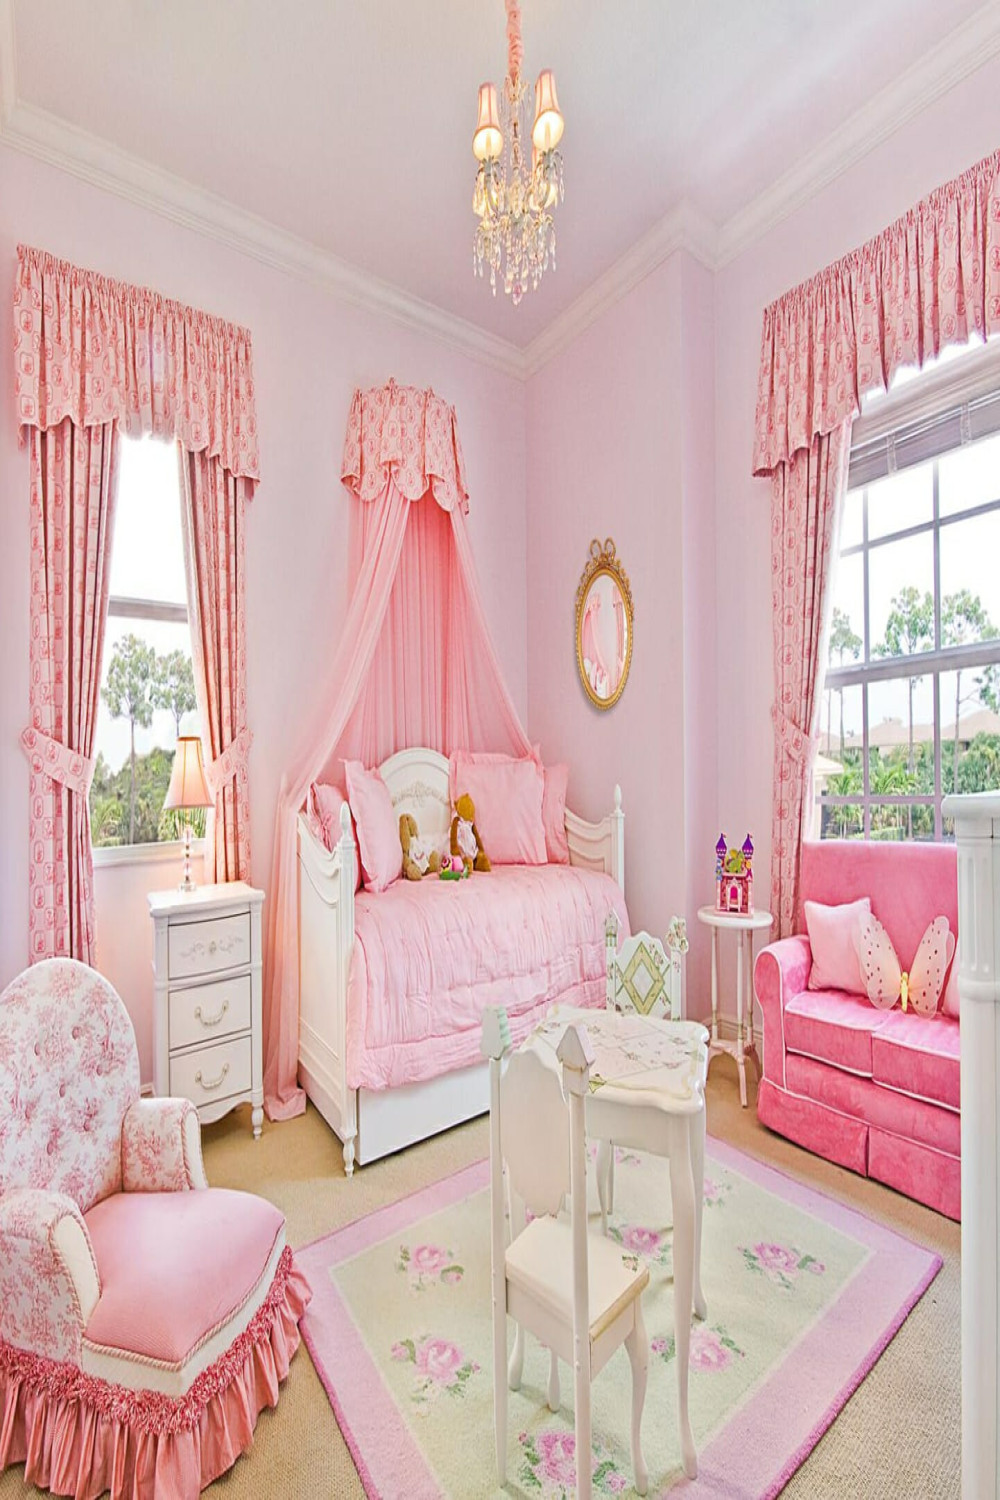 Incredibly Captivating Princess Bedroom Ideas to Steal